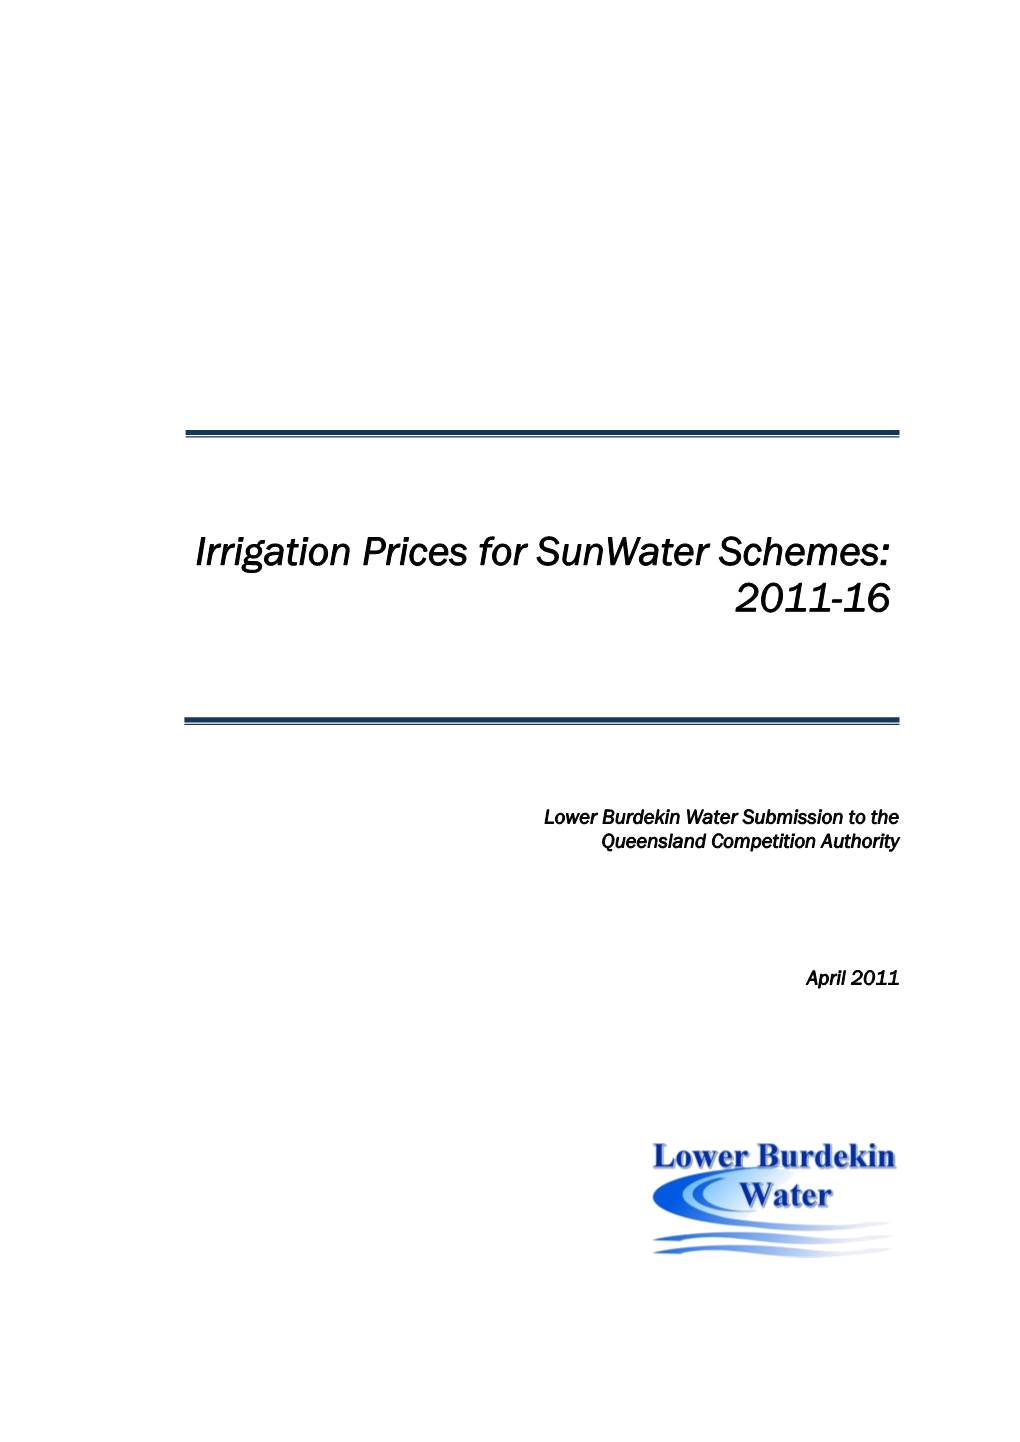 Irrigation Prices for Sunwater Schemes: 2011-16